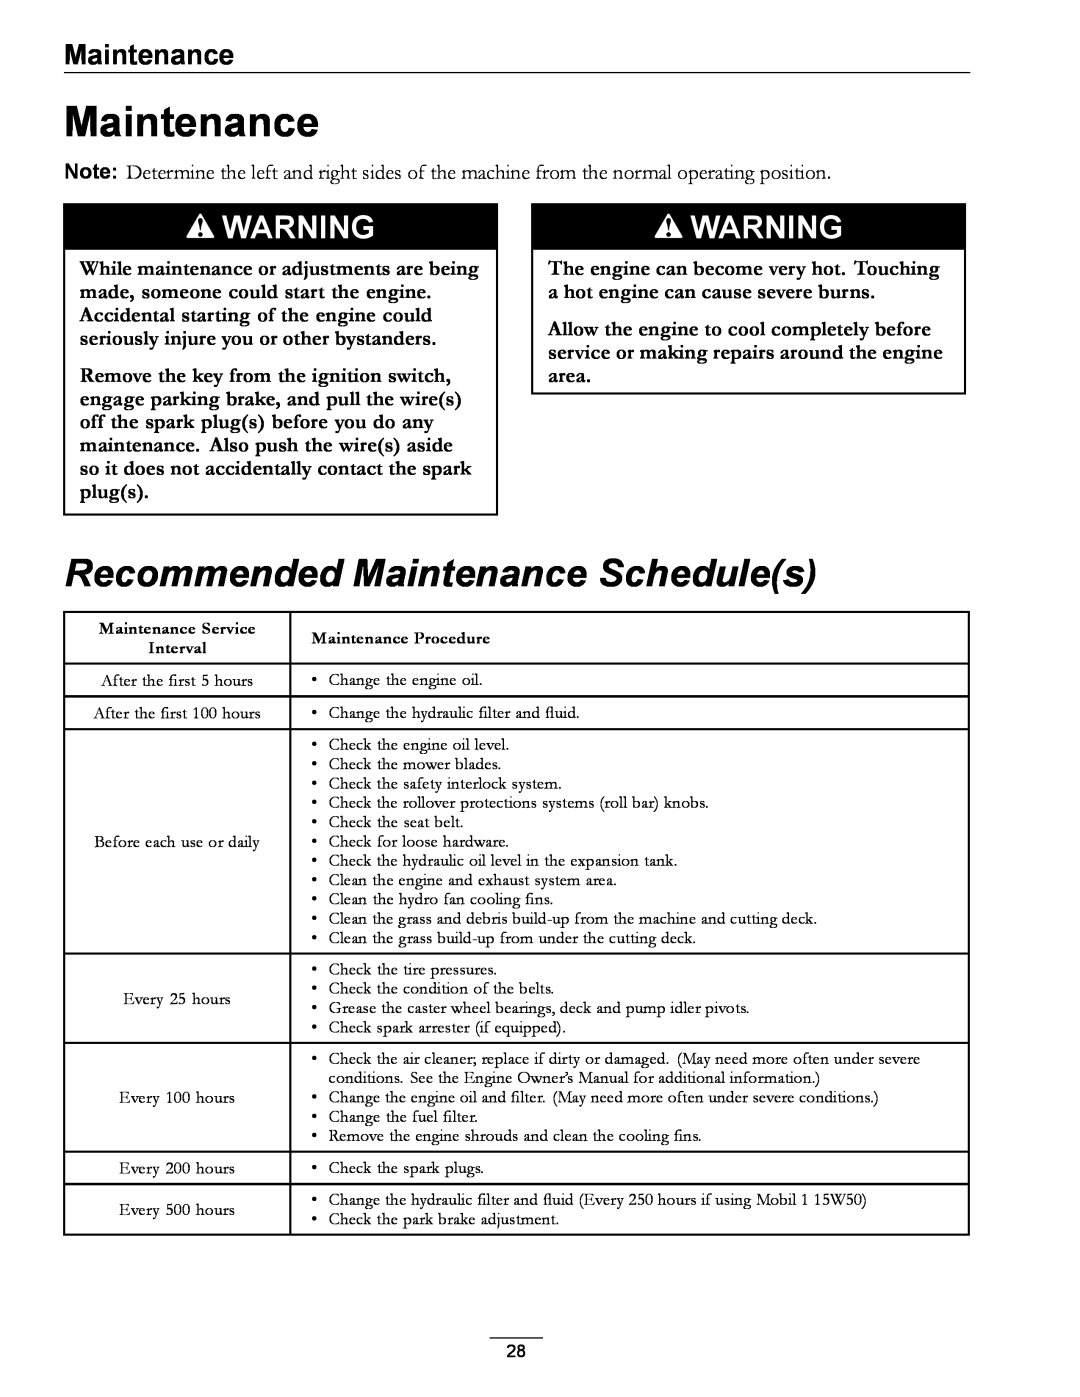 Exmark 850, 00 & Higher manual Recommended Maintenance Schedules 